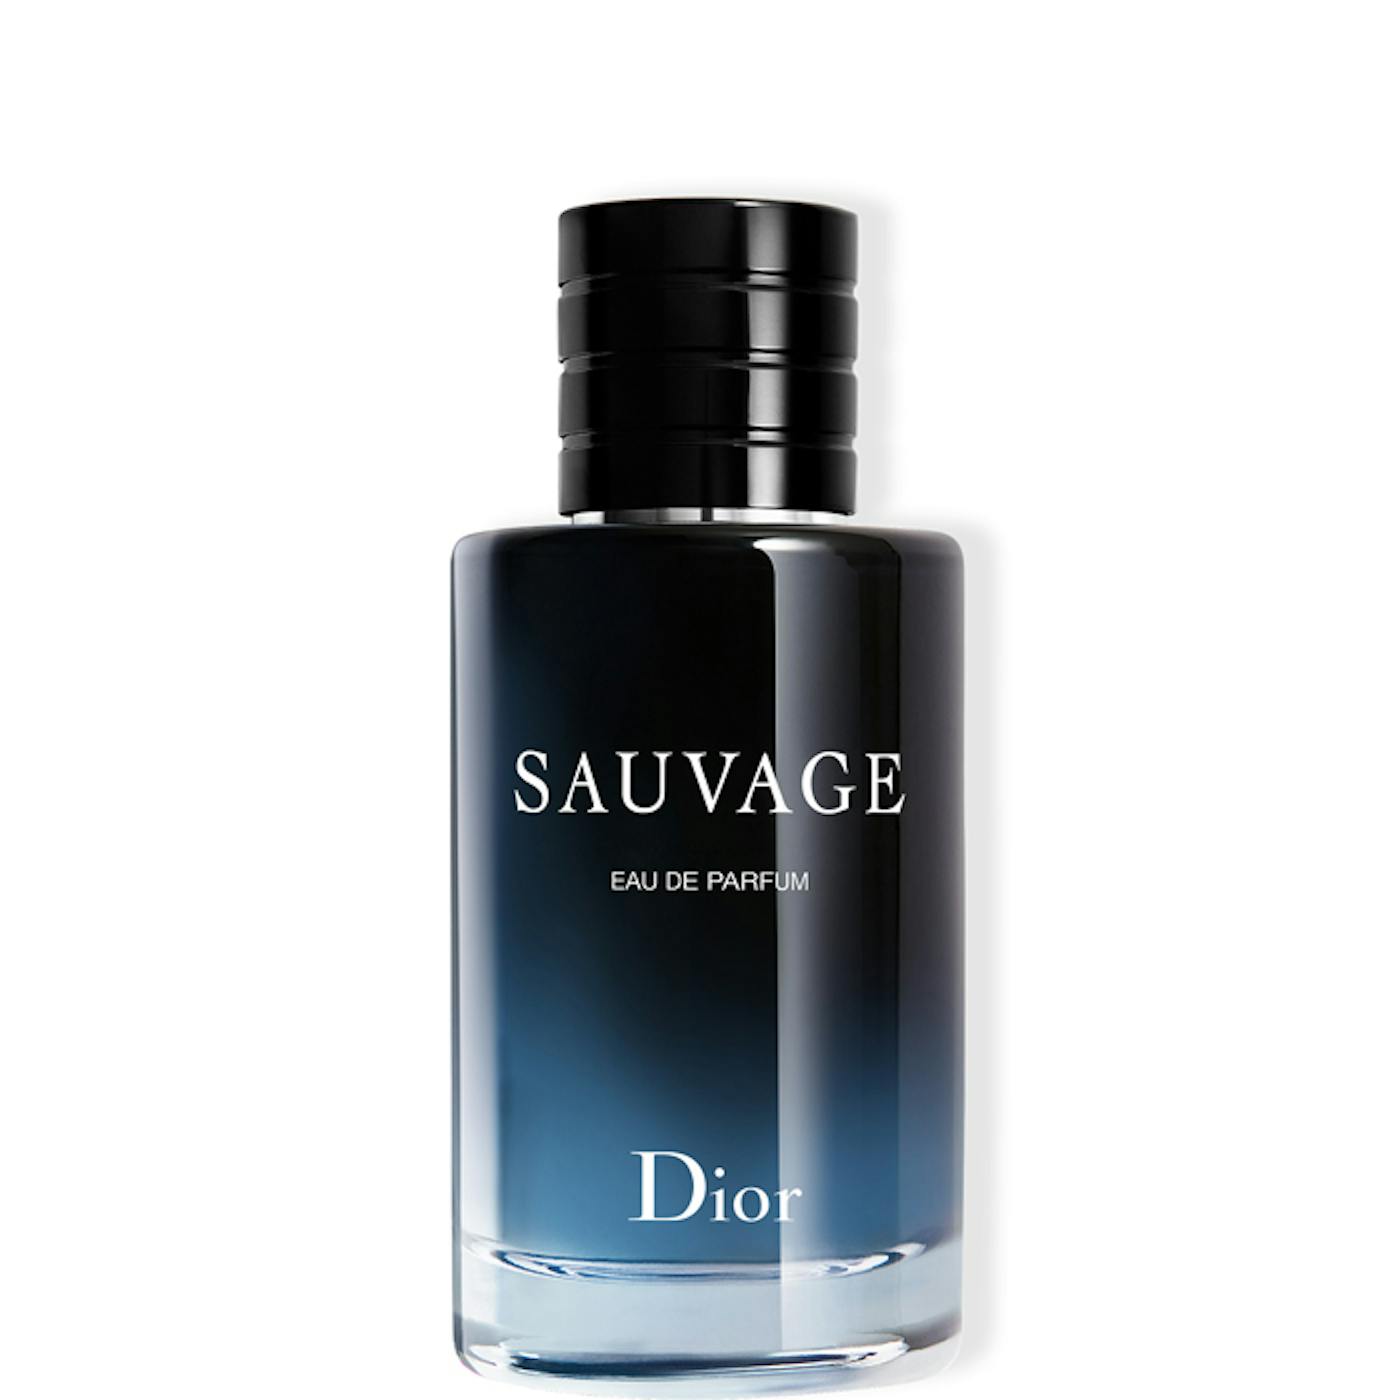 Sauvage Grooming Duo - Limited Edition Valentine's Day Fragrance Ritual Set